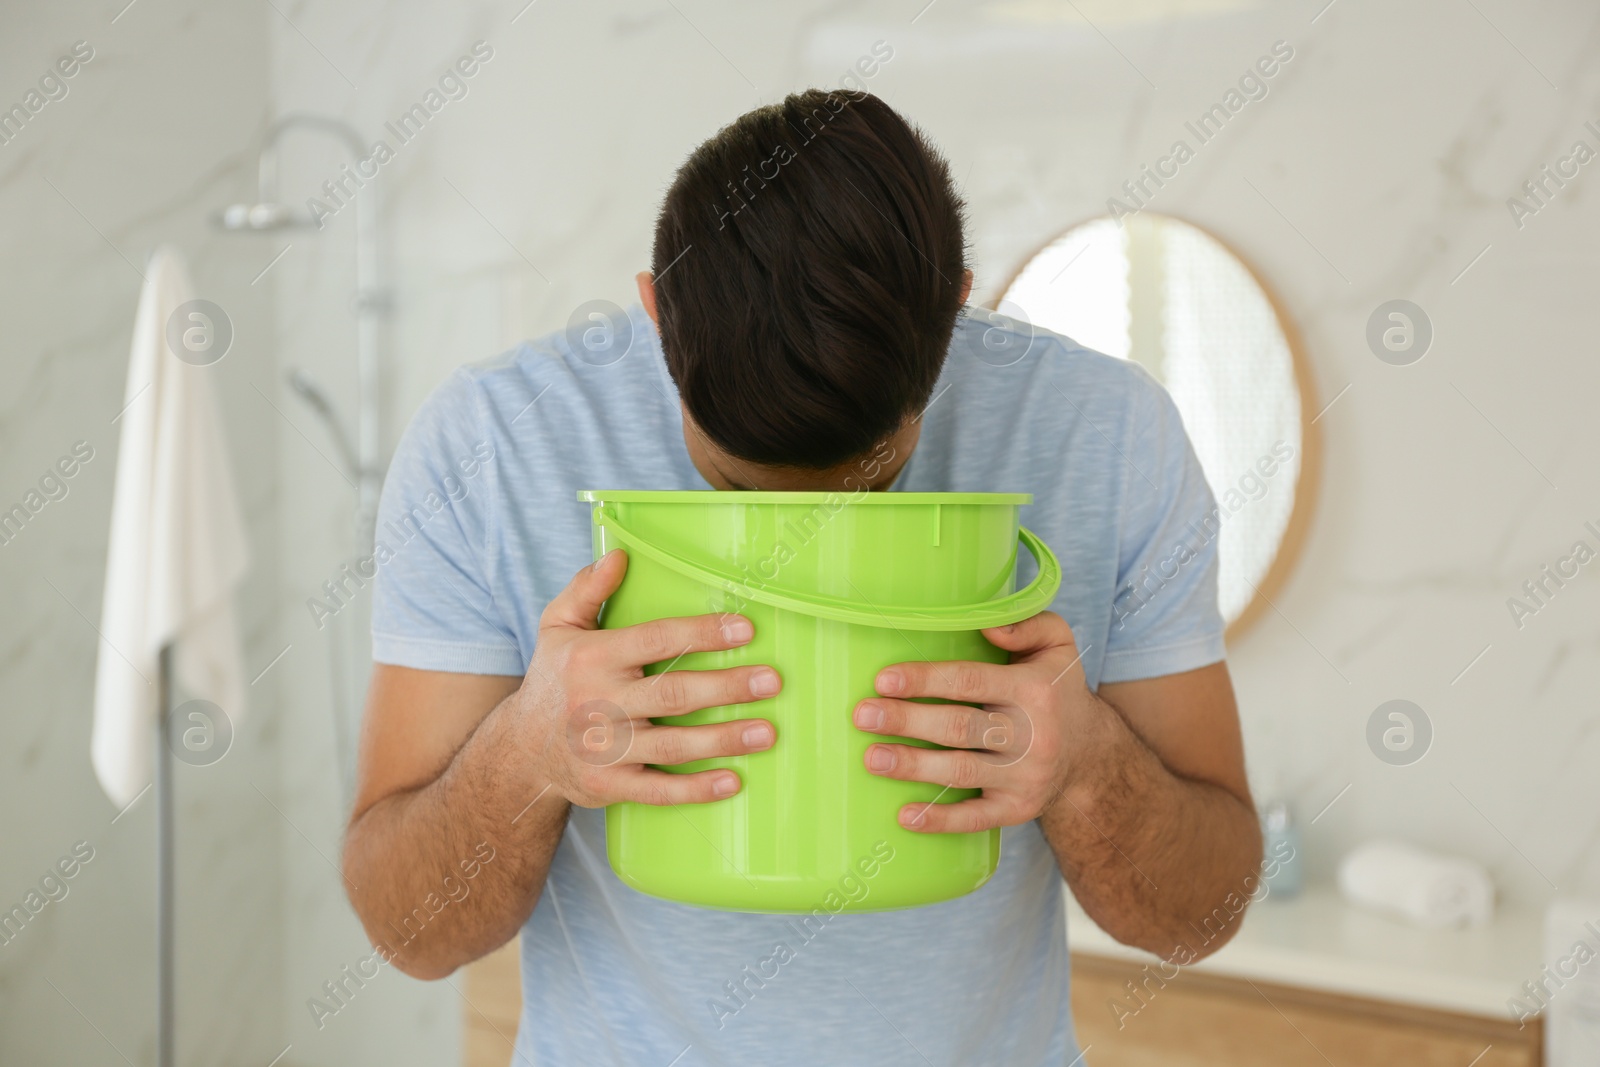 Photo of Man with bucket suffering from nausea in bathroom. Food poisoning